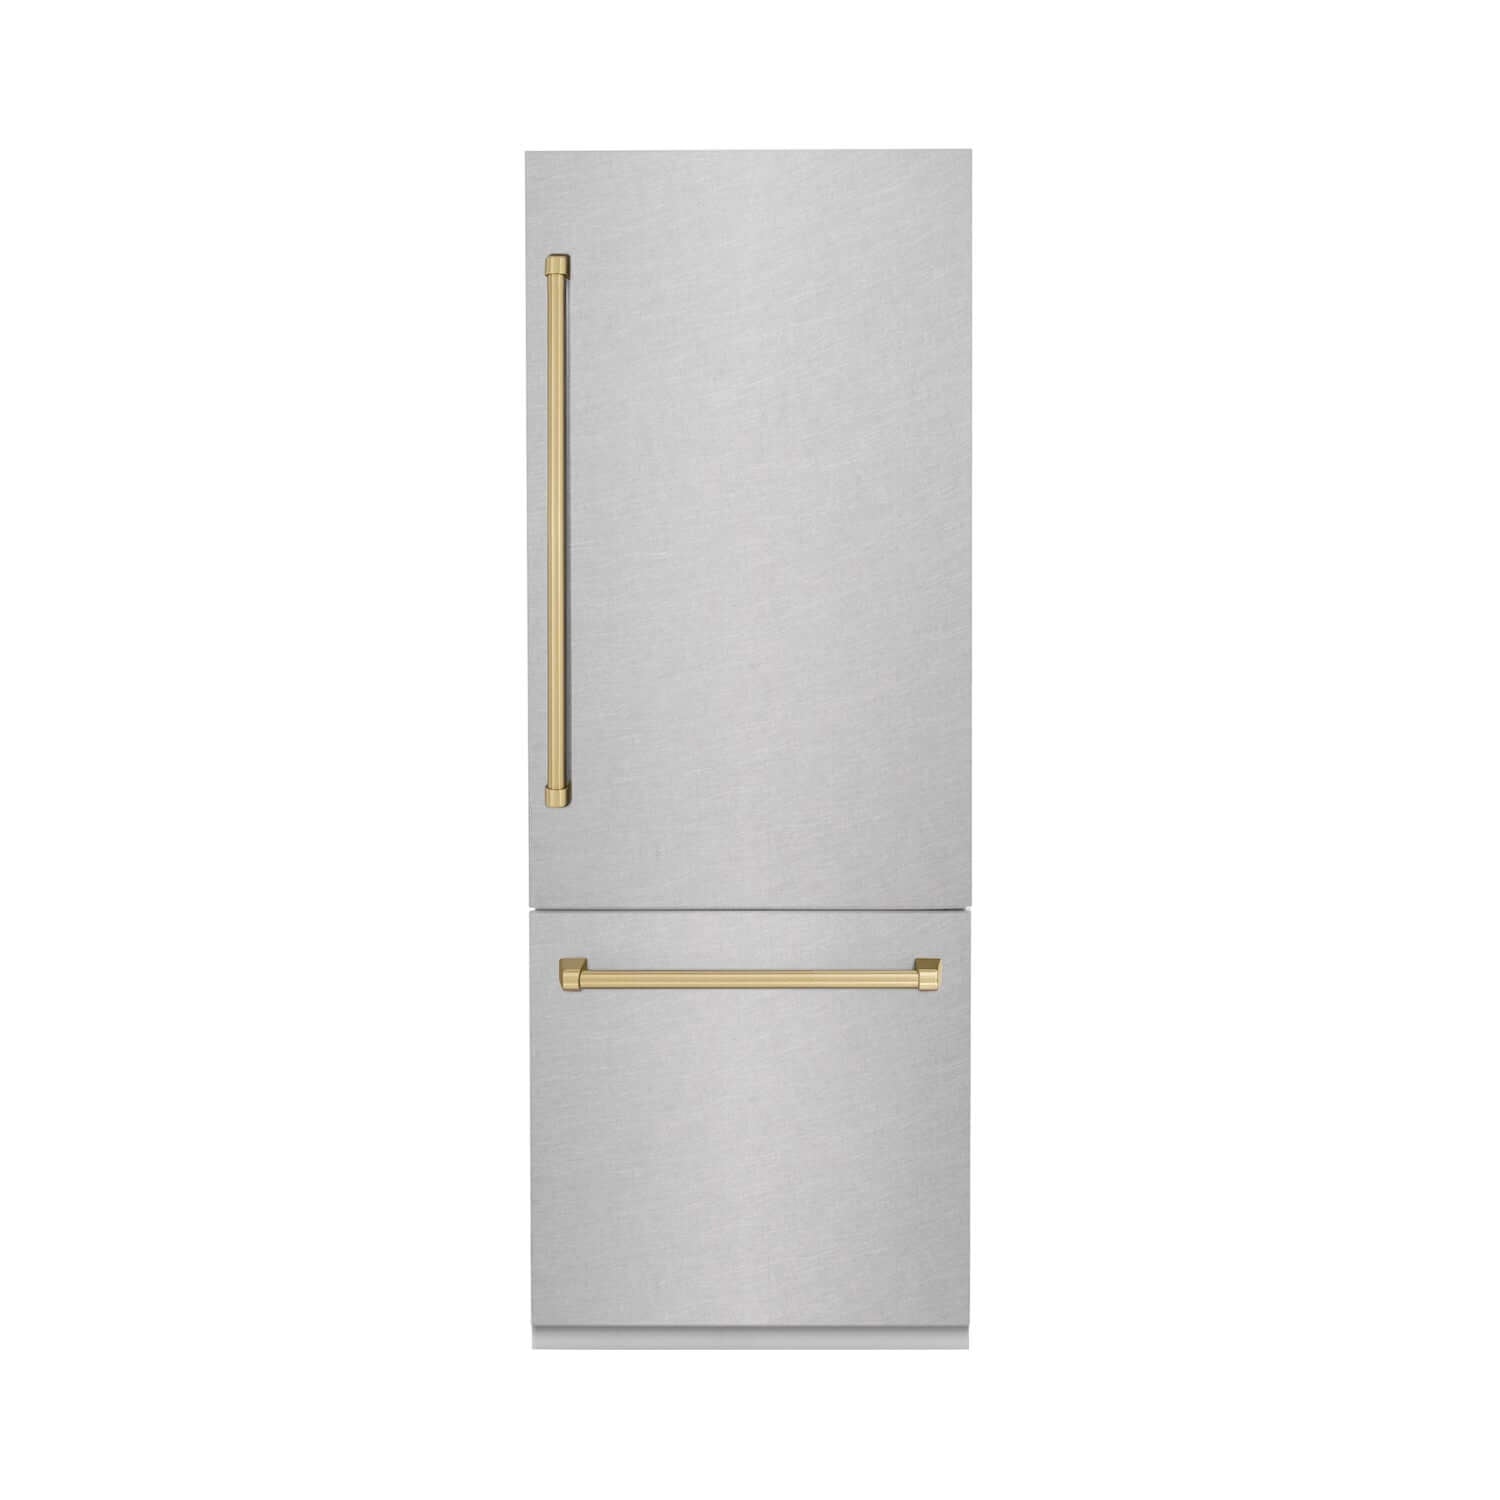 ZLINE 30" Built-in Refrigerator with DuraSnow Stainless Steel panels front.